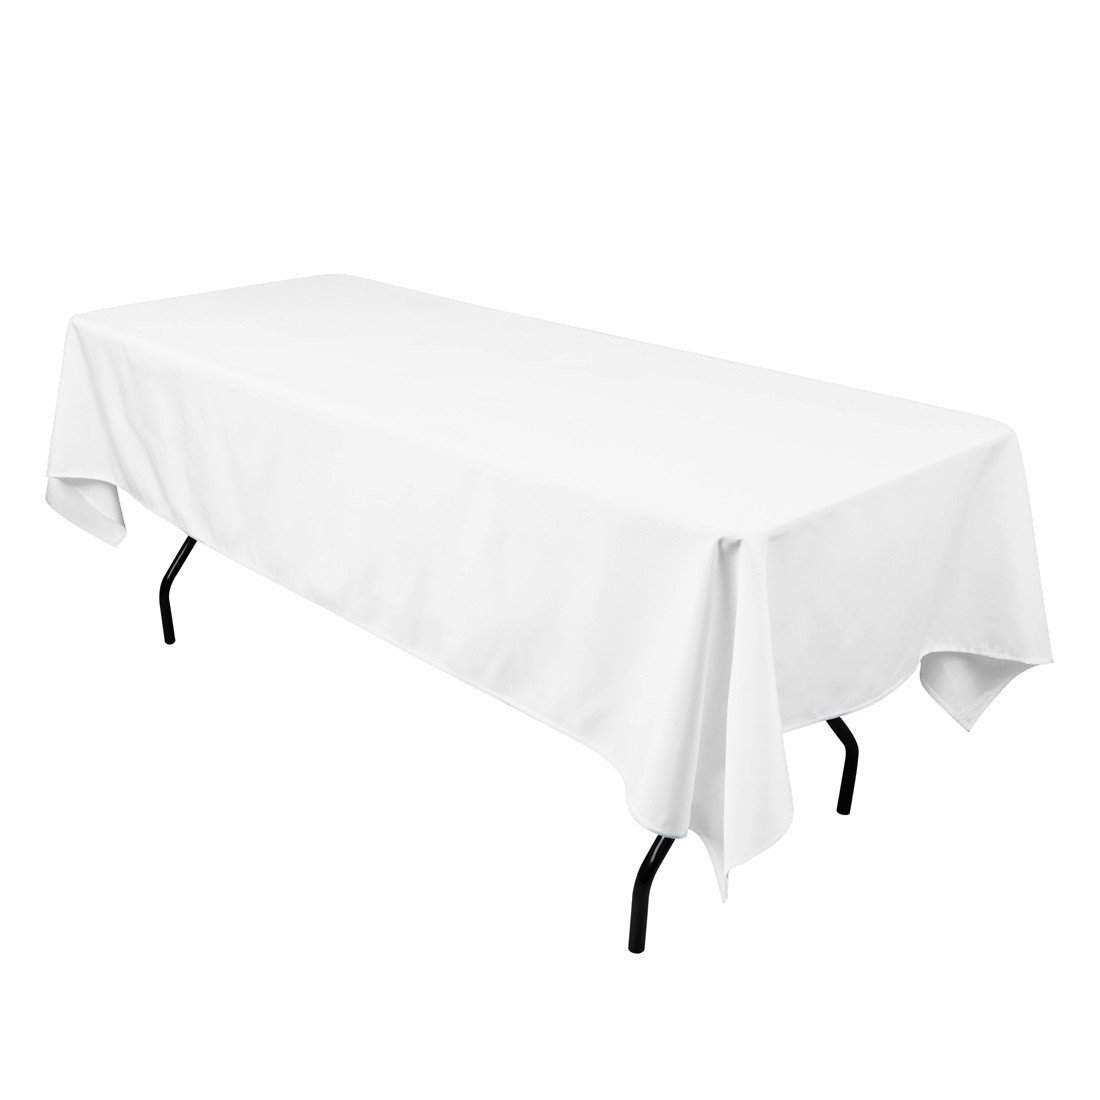 Table Cloth Rectangular Allwell Hire, What Size Linen For 8ft Rectangular Tablecloth